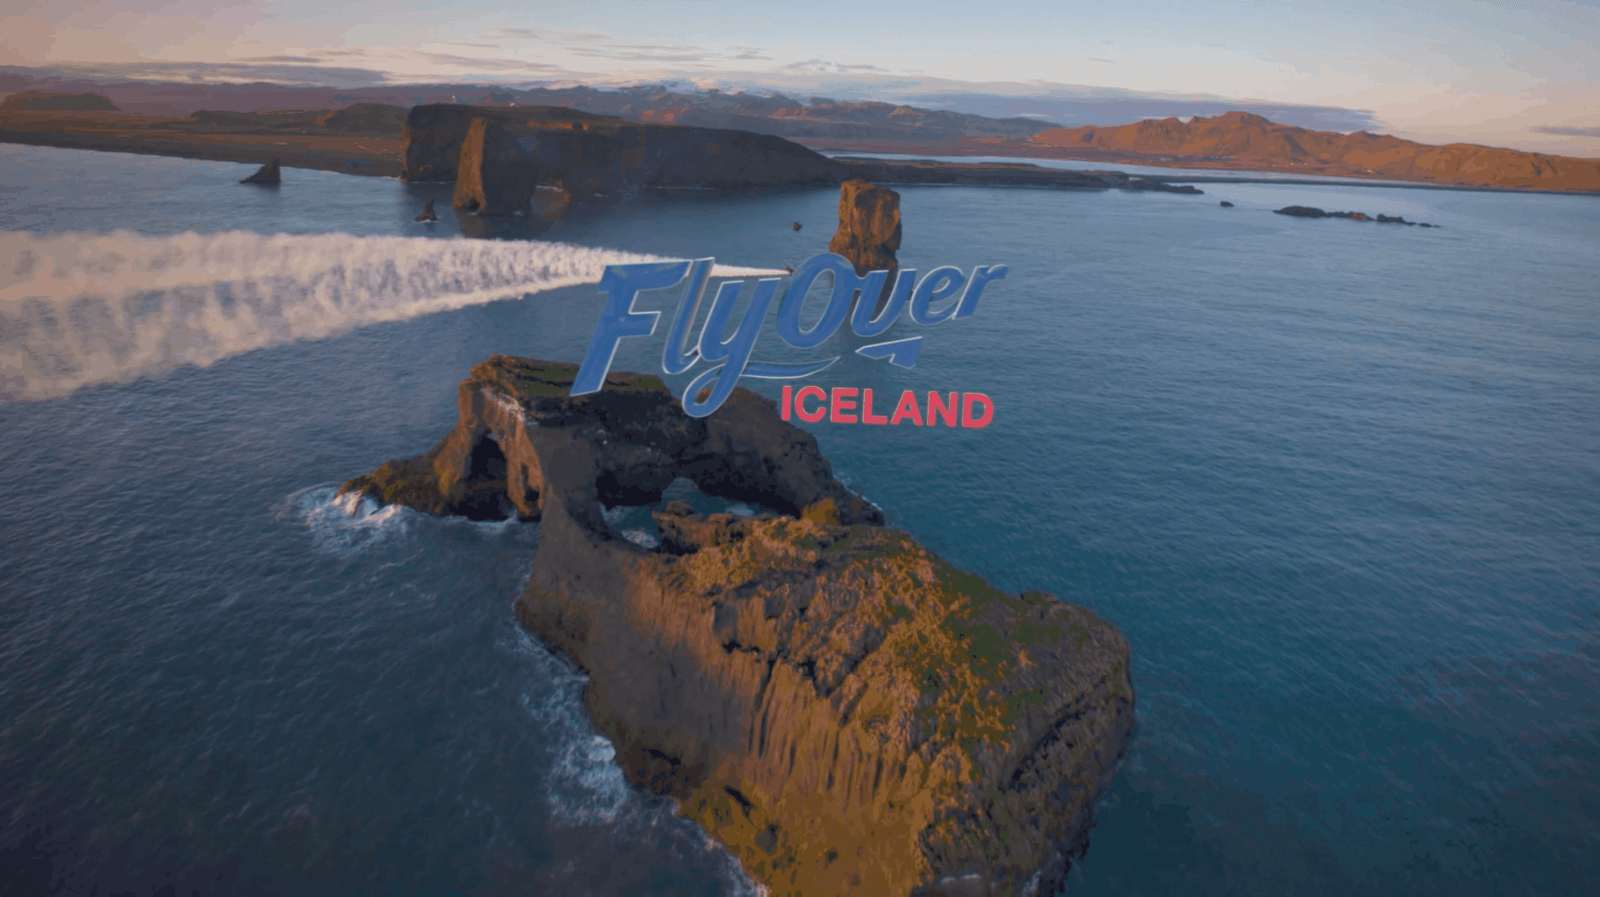 Be thrilled with FlyOver Iceland.